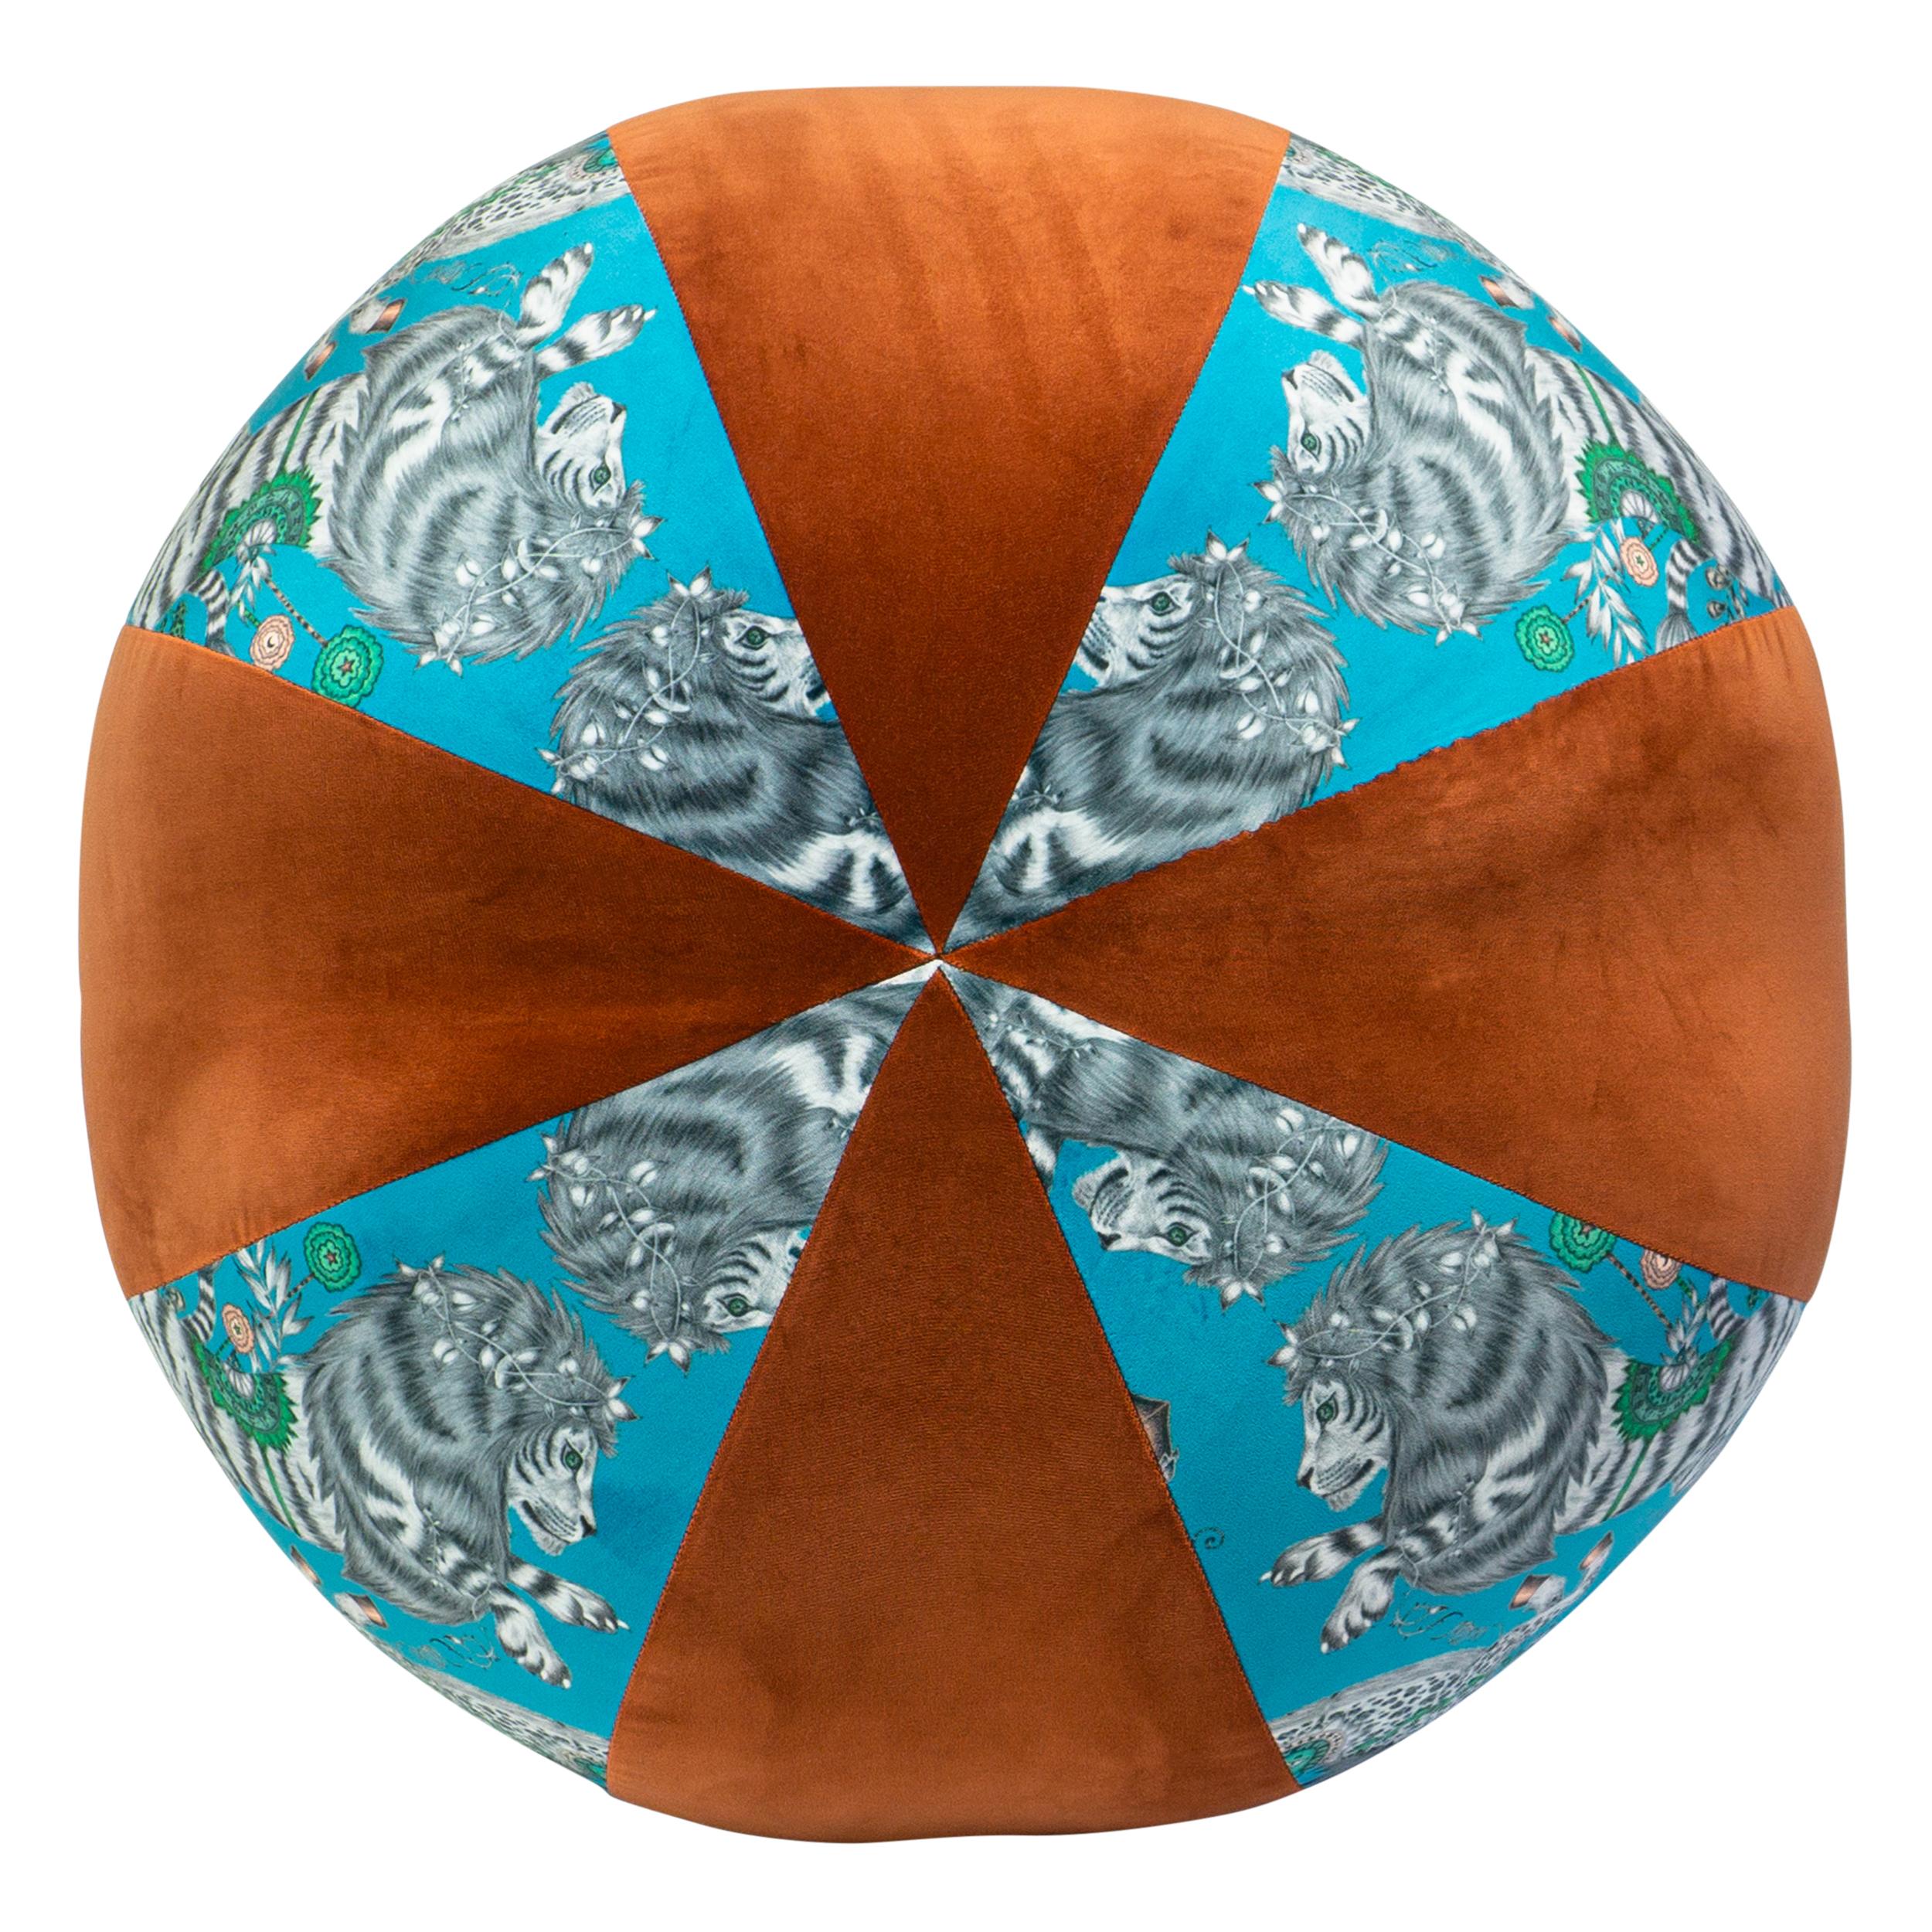 Fantastical Beach Ball Pouf with Emma Shipley Printed Velvet Firm for Sitting For Sale 1